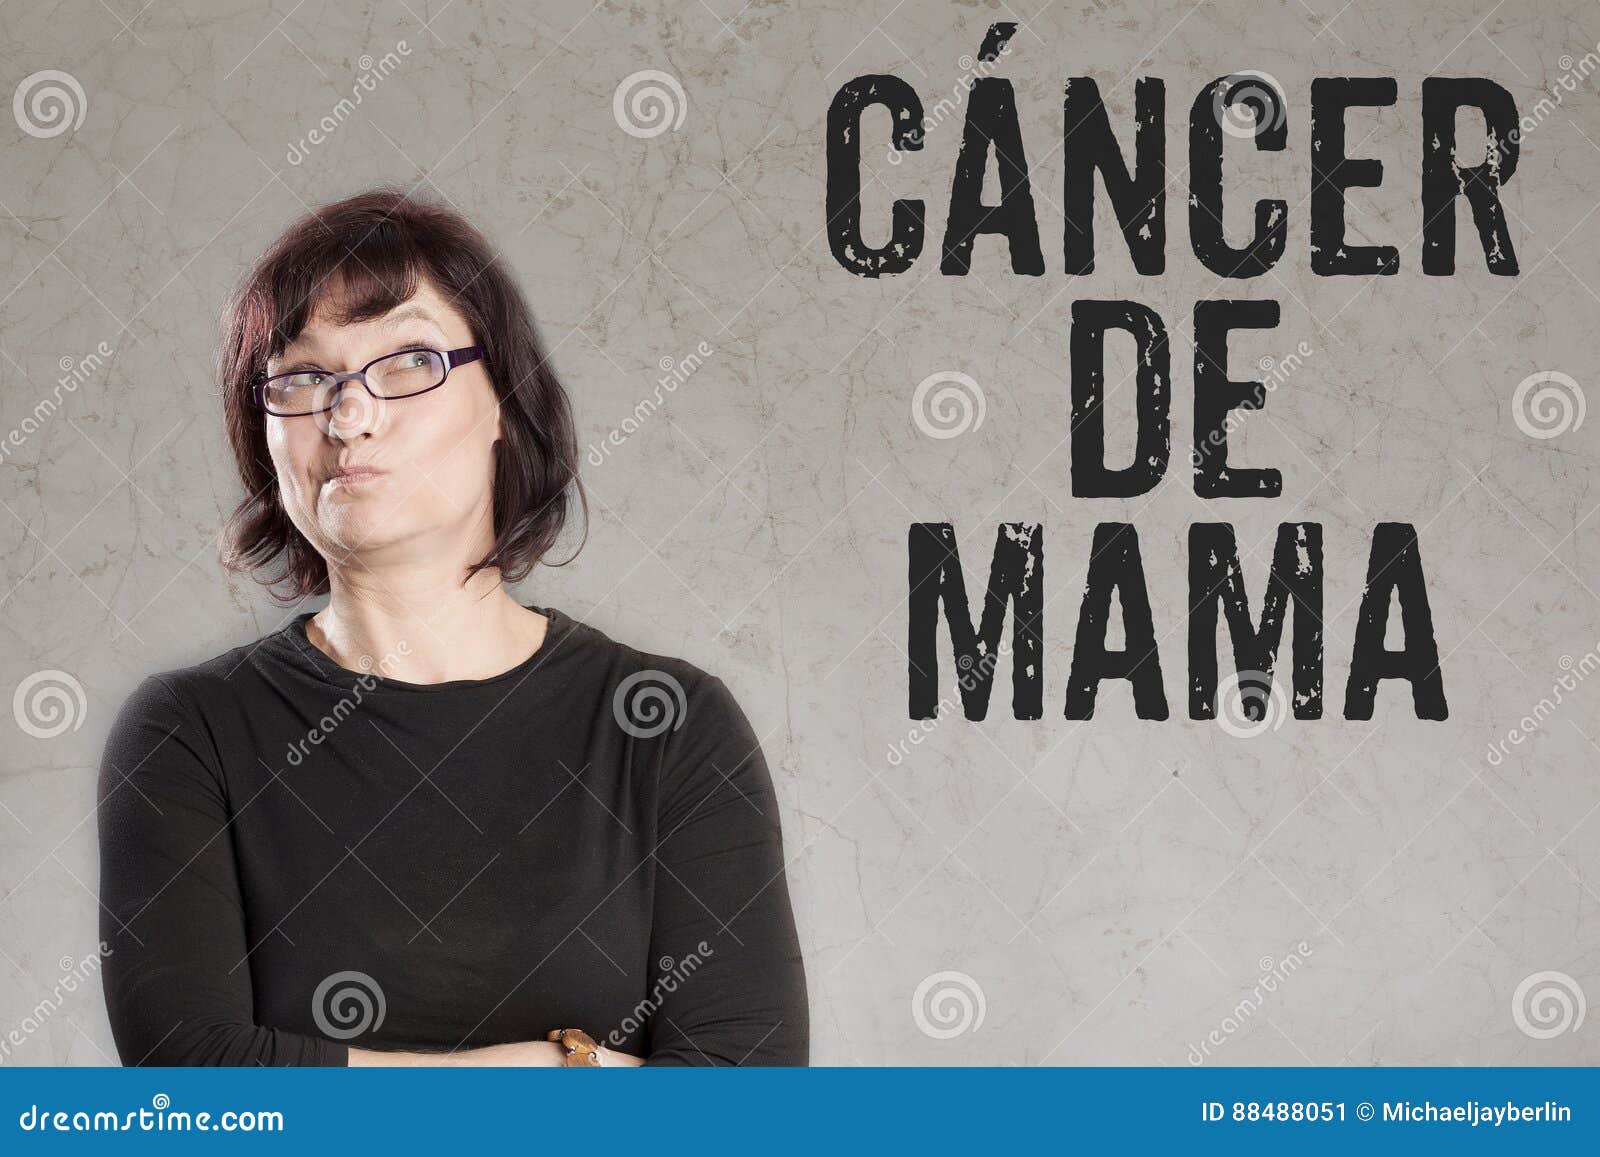 cancer de mama, spanish text for breast cancer woman writing on